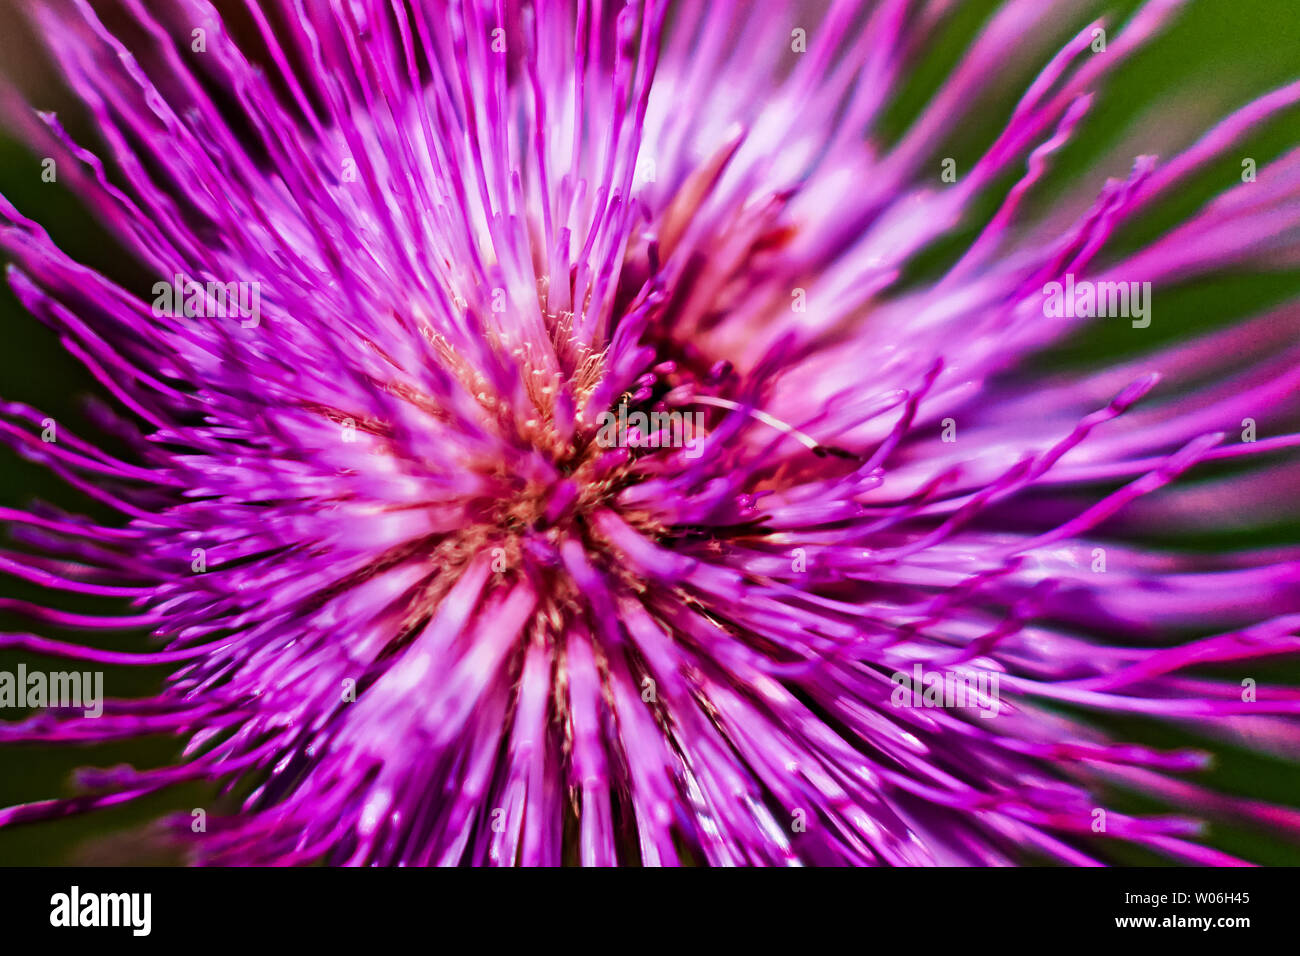 A detail of a melancholy thistle flower from above. The flowers are not too beautiful, bur from a different angle they create a dramatic view. Stock Photo